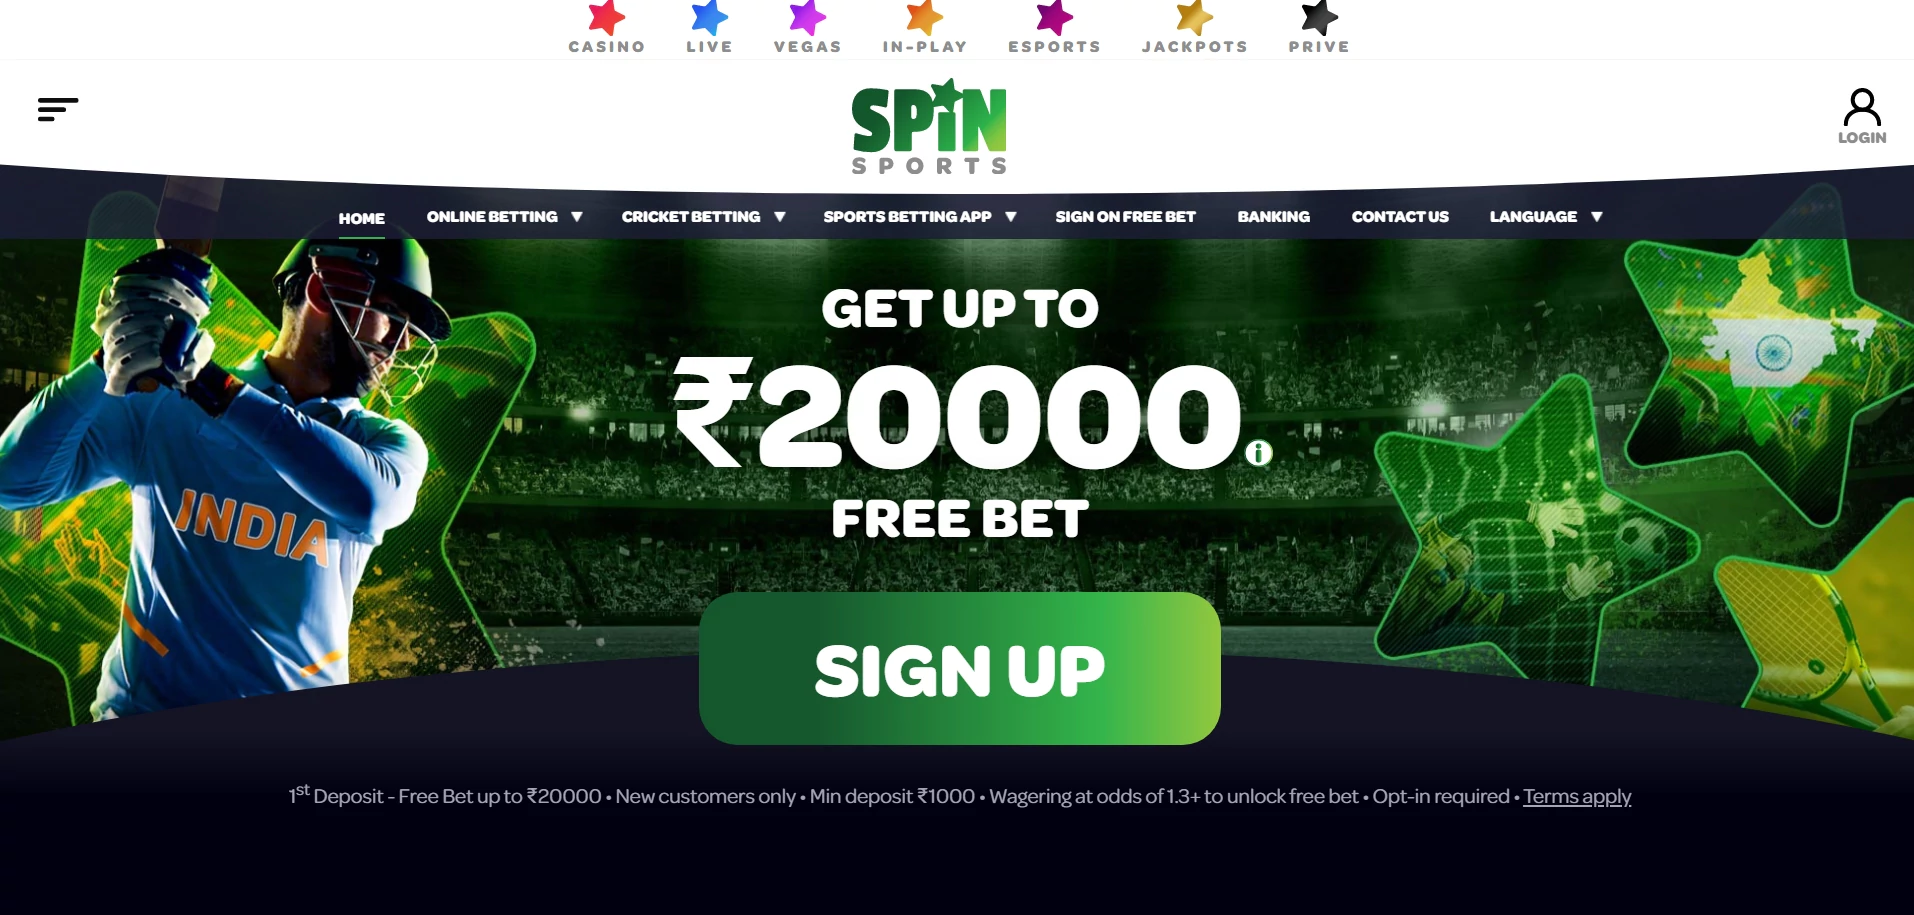 Spinsports homepage